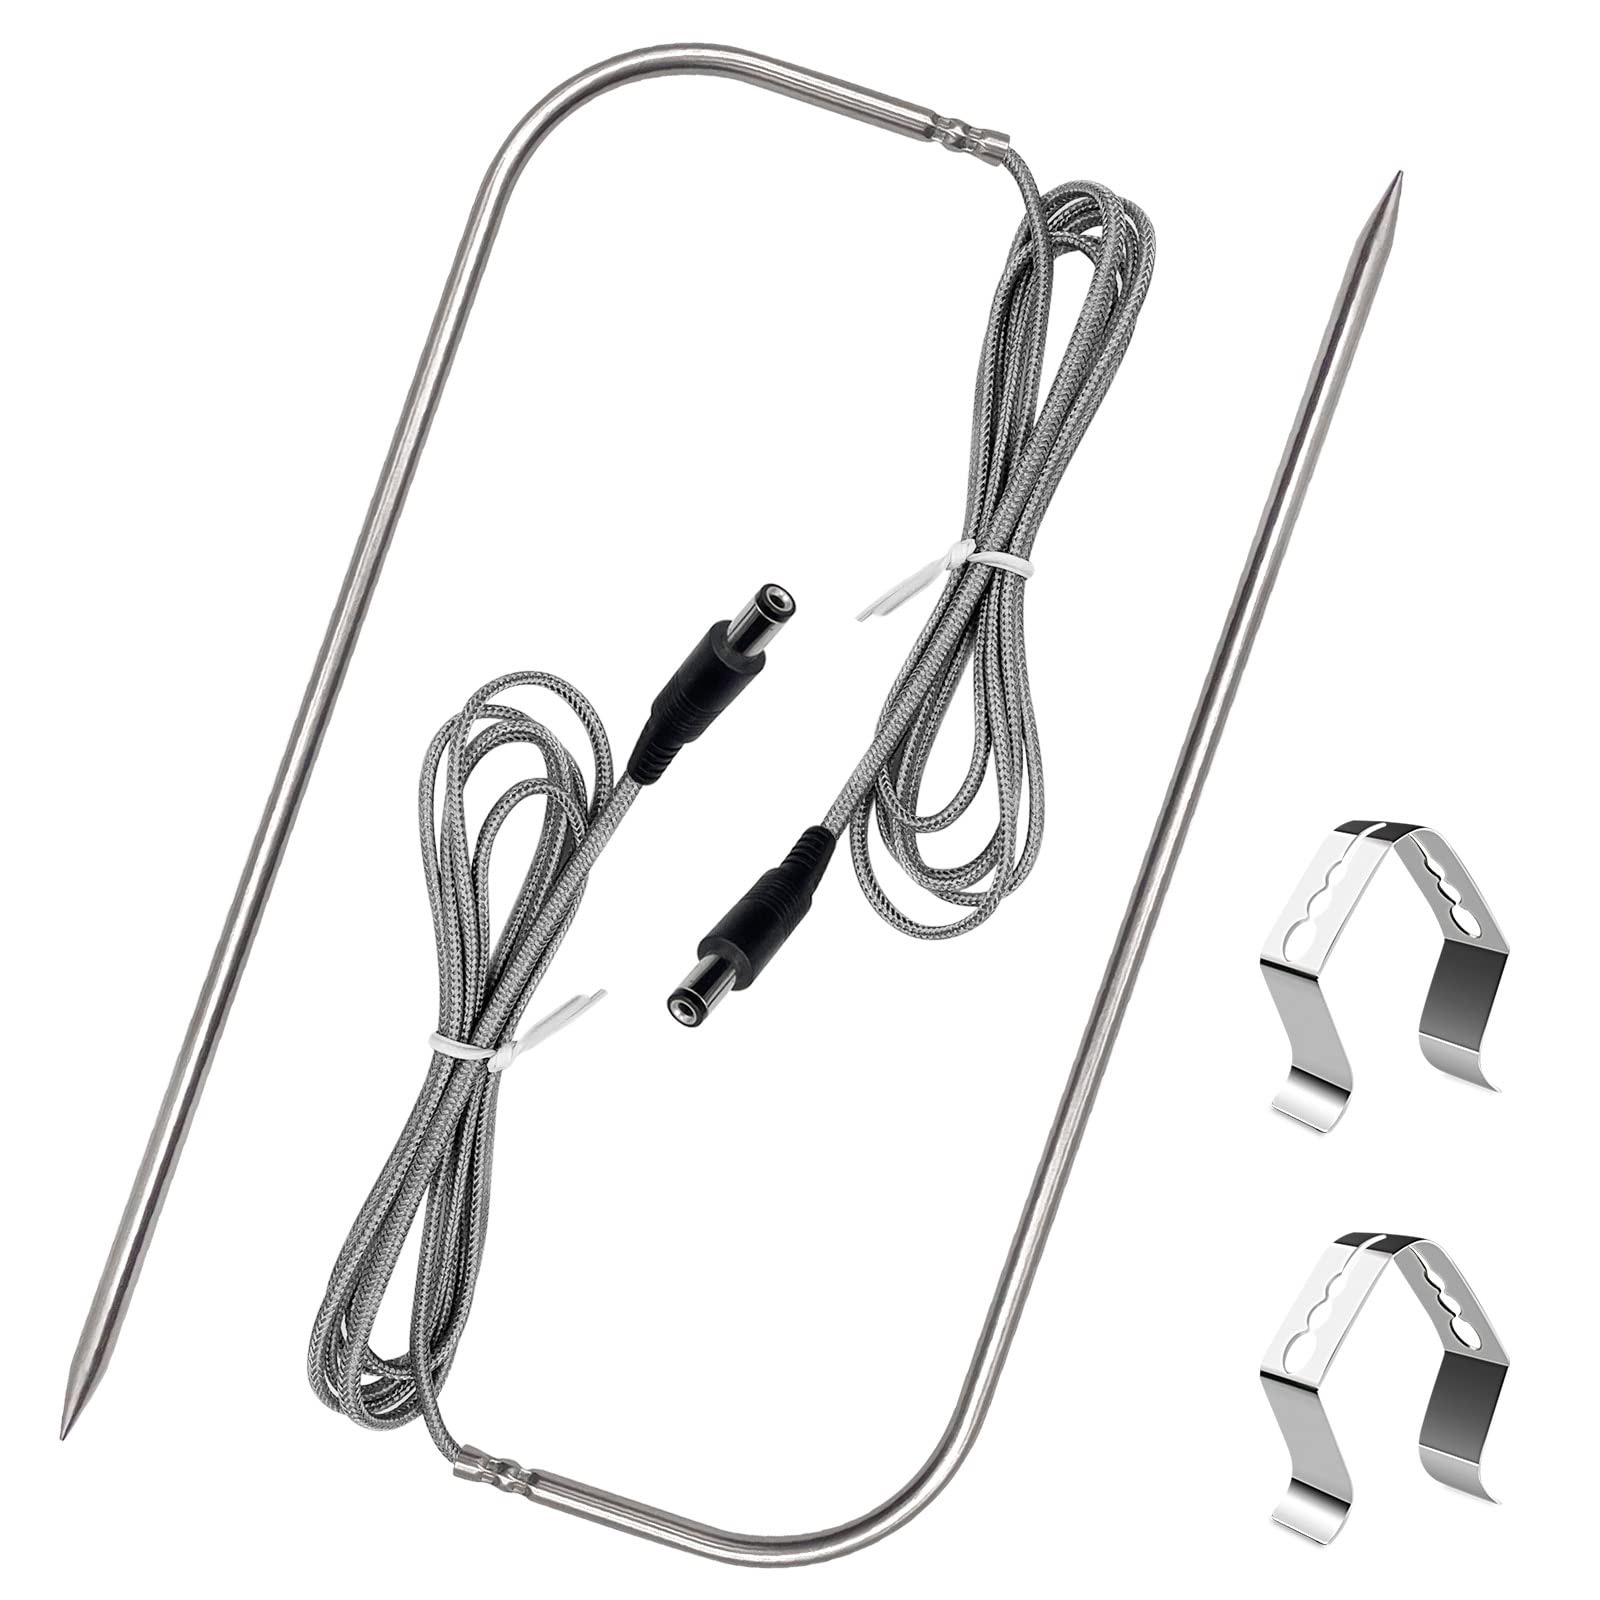 Replacement for Recteq/Rec Tec Grill Meat Probe with Probe Holder Clip-YAOAWE